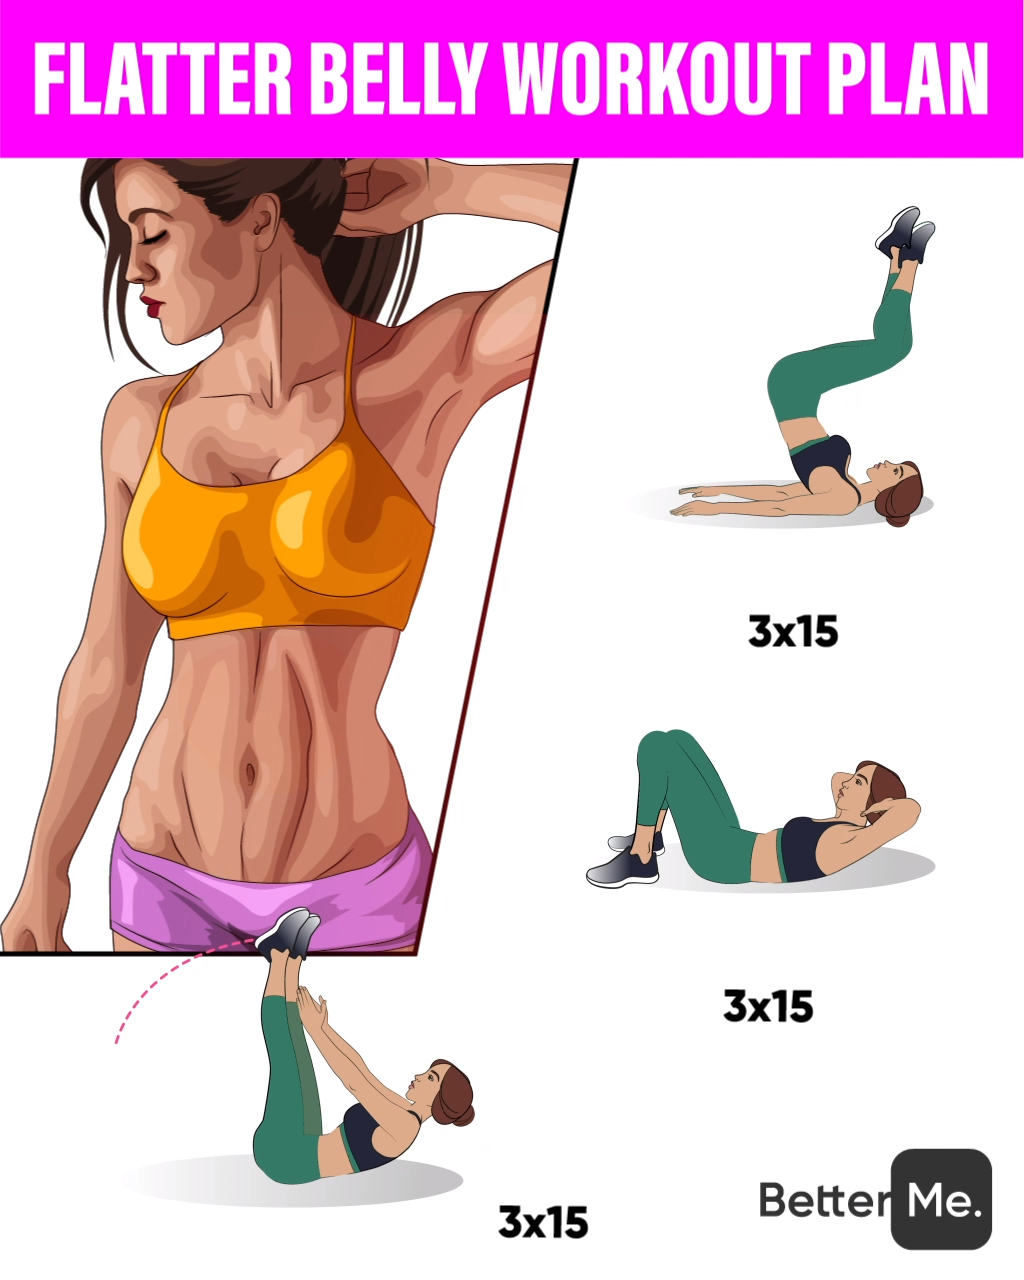 23 fitness At Home videos ideas